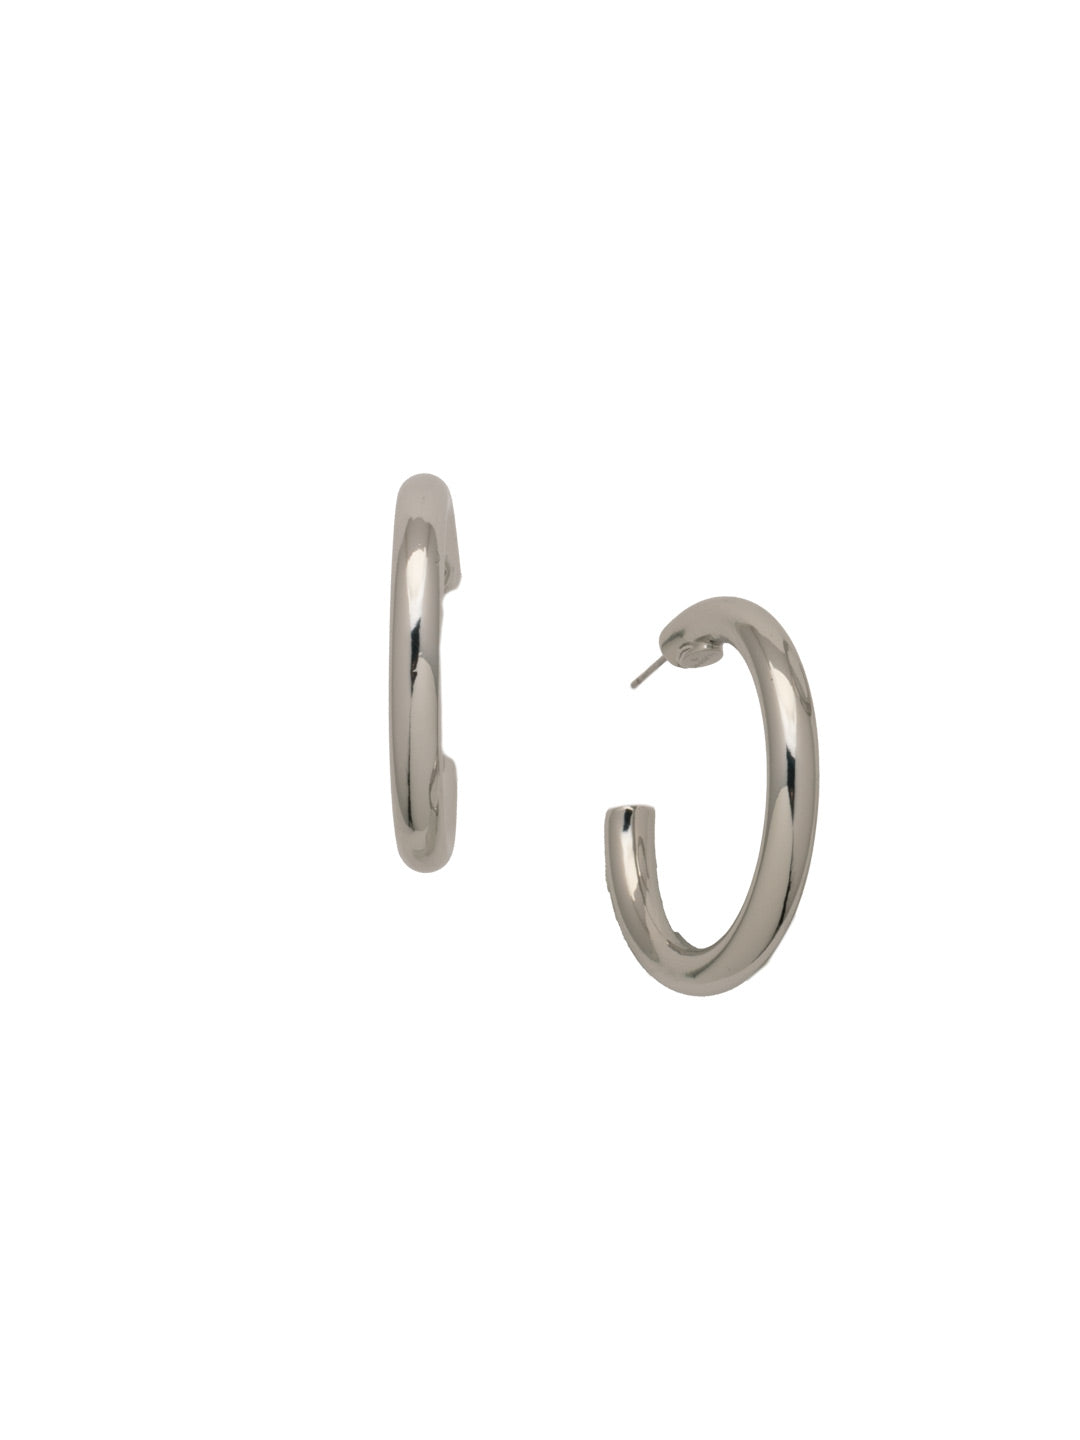 Keeley Hoop Earrings - 4EFF1PDMTL - <p>The Keeley Hoop Earrings are your next wardrobe staple! These everyday hoops are lightweight and comfortable, with an open design and a monster back. From Sorrelli's Bare Metallic collection in our Palladium finish.</p>